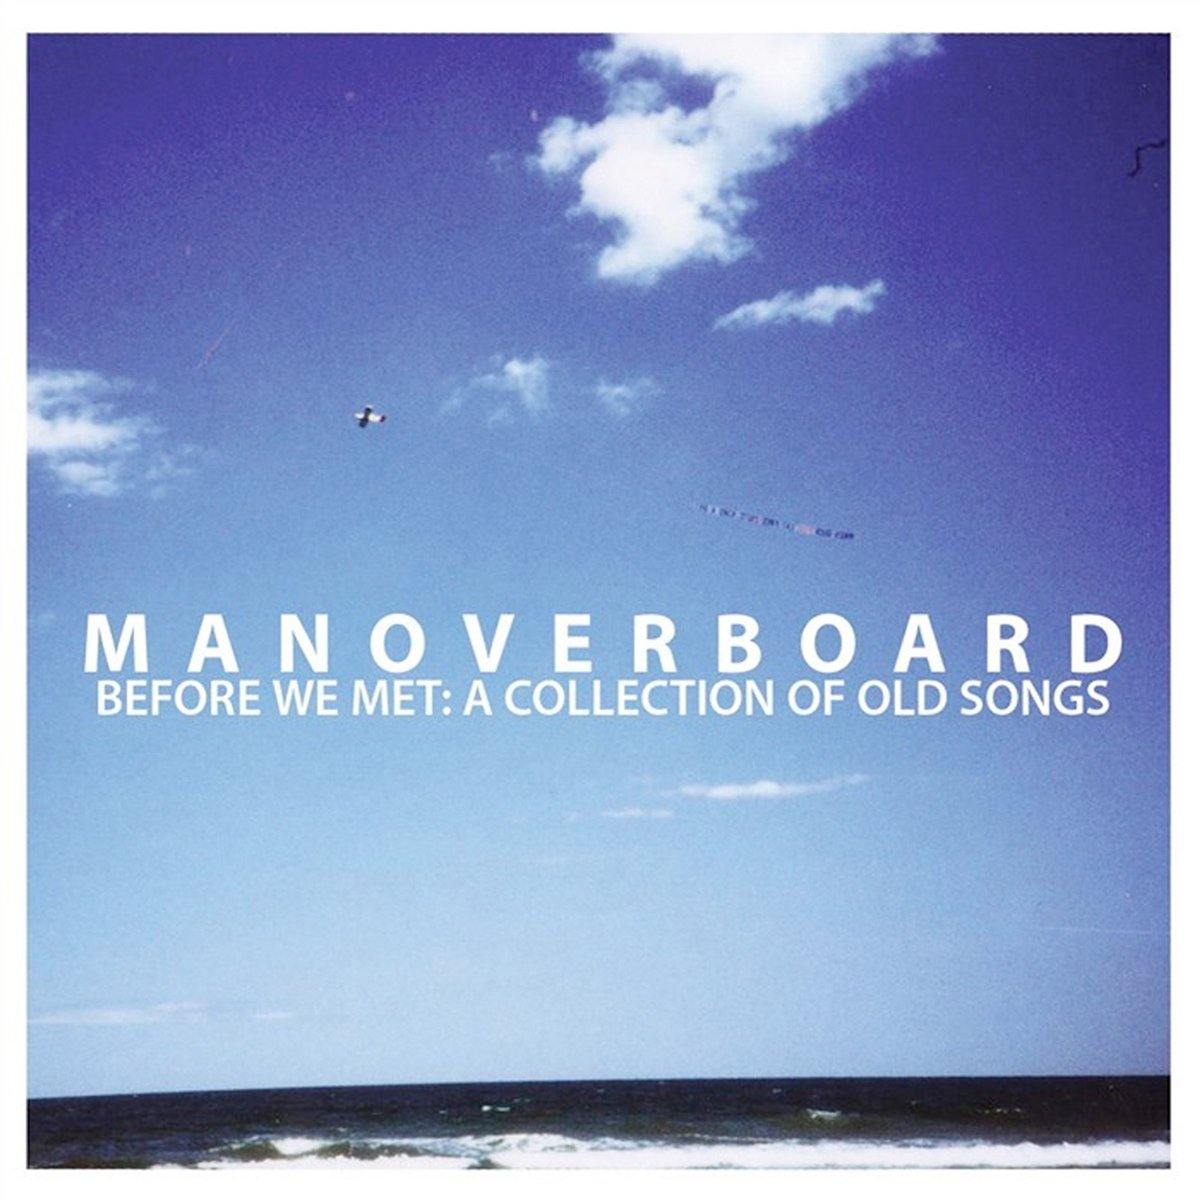 Buy – Man Overboard "Before We Met: A Collection of Old Songs" – Band & Music Merch – Cold Cuts Merch